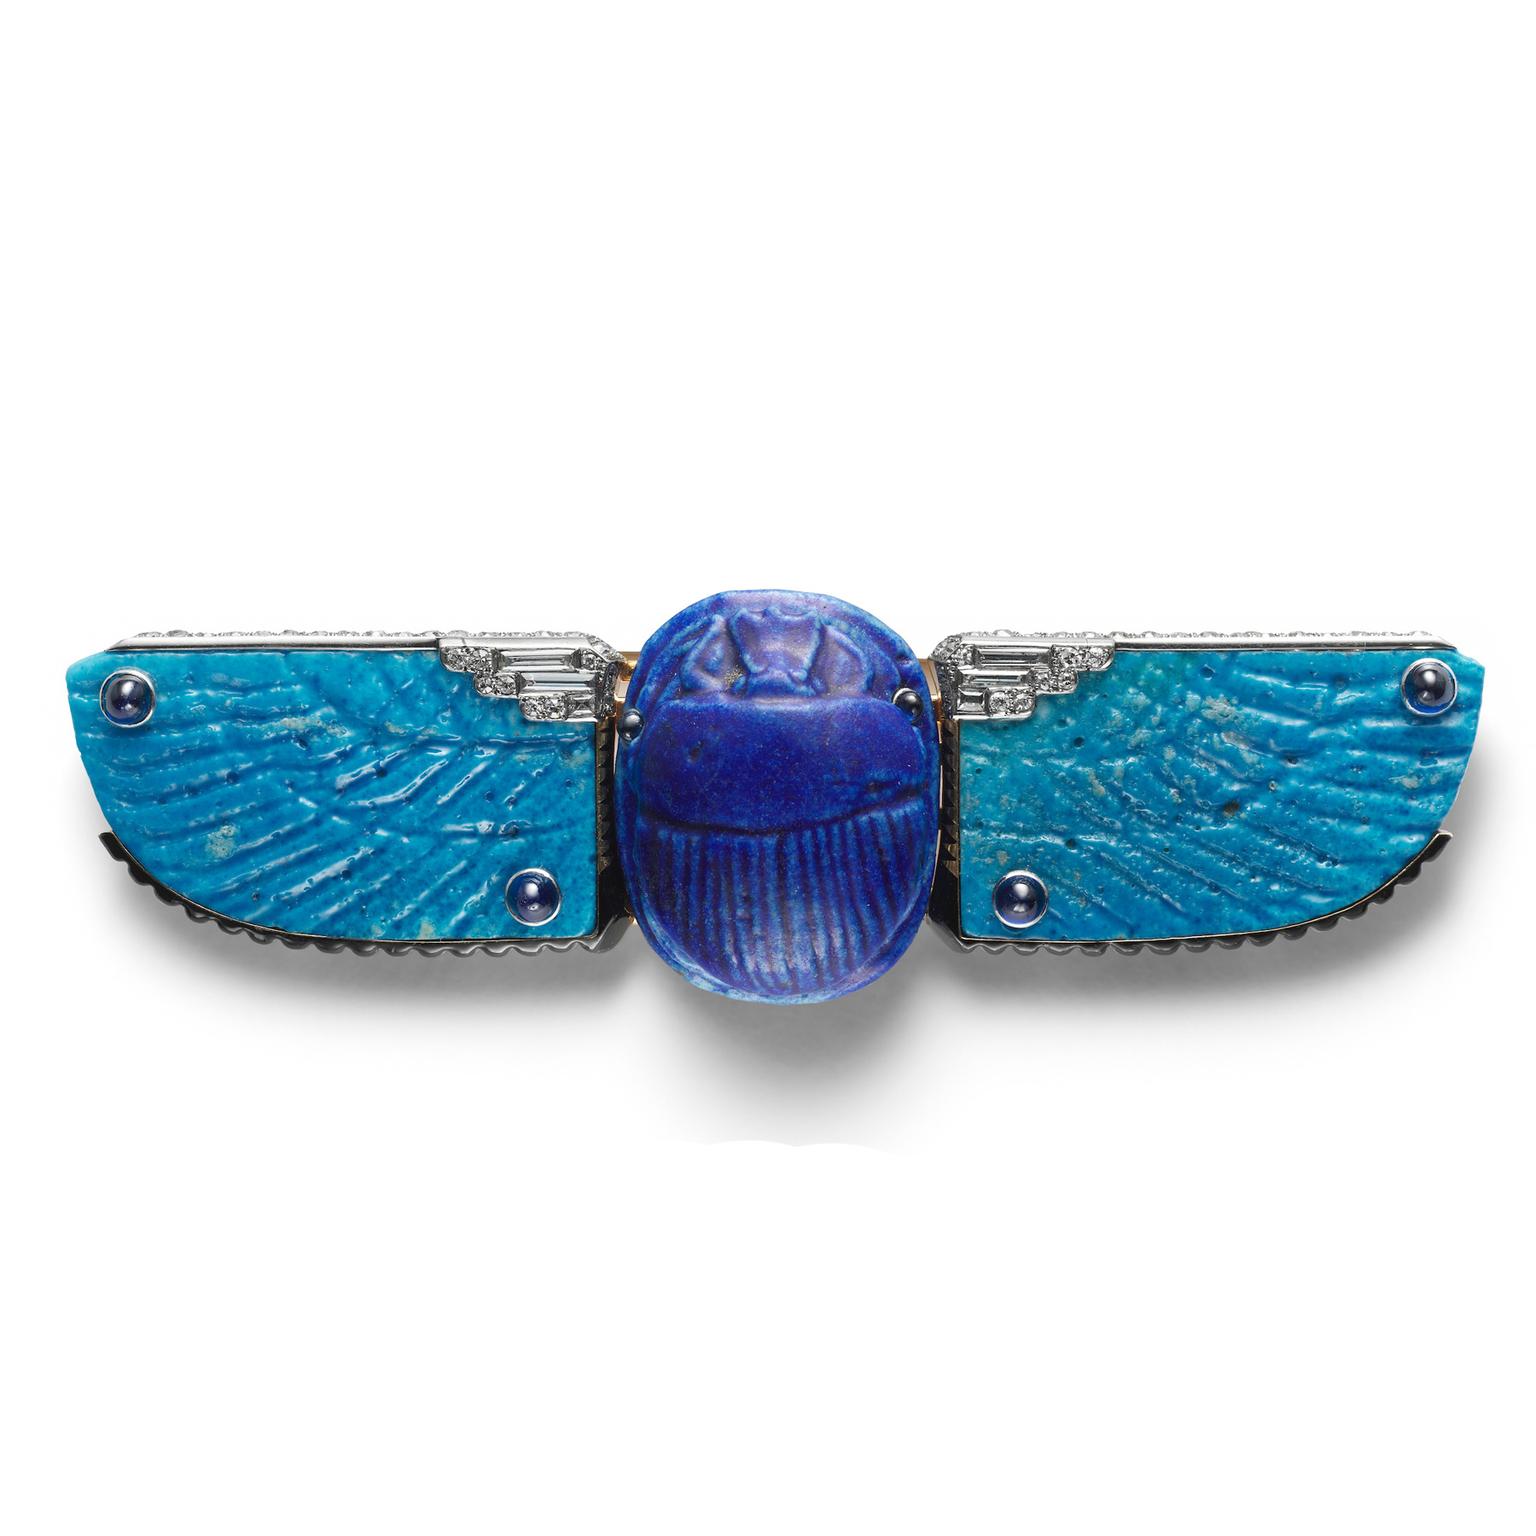 Cartier Scarab Egyptian belt buckle from 1926